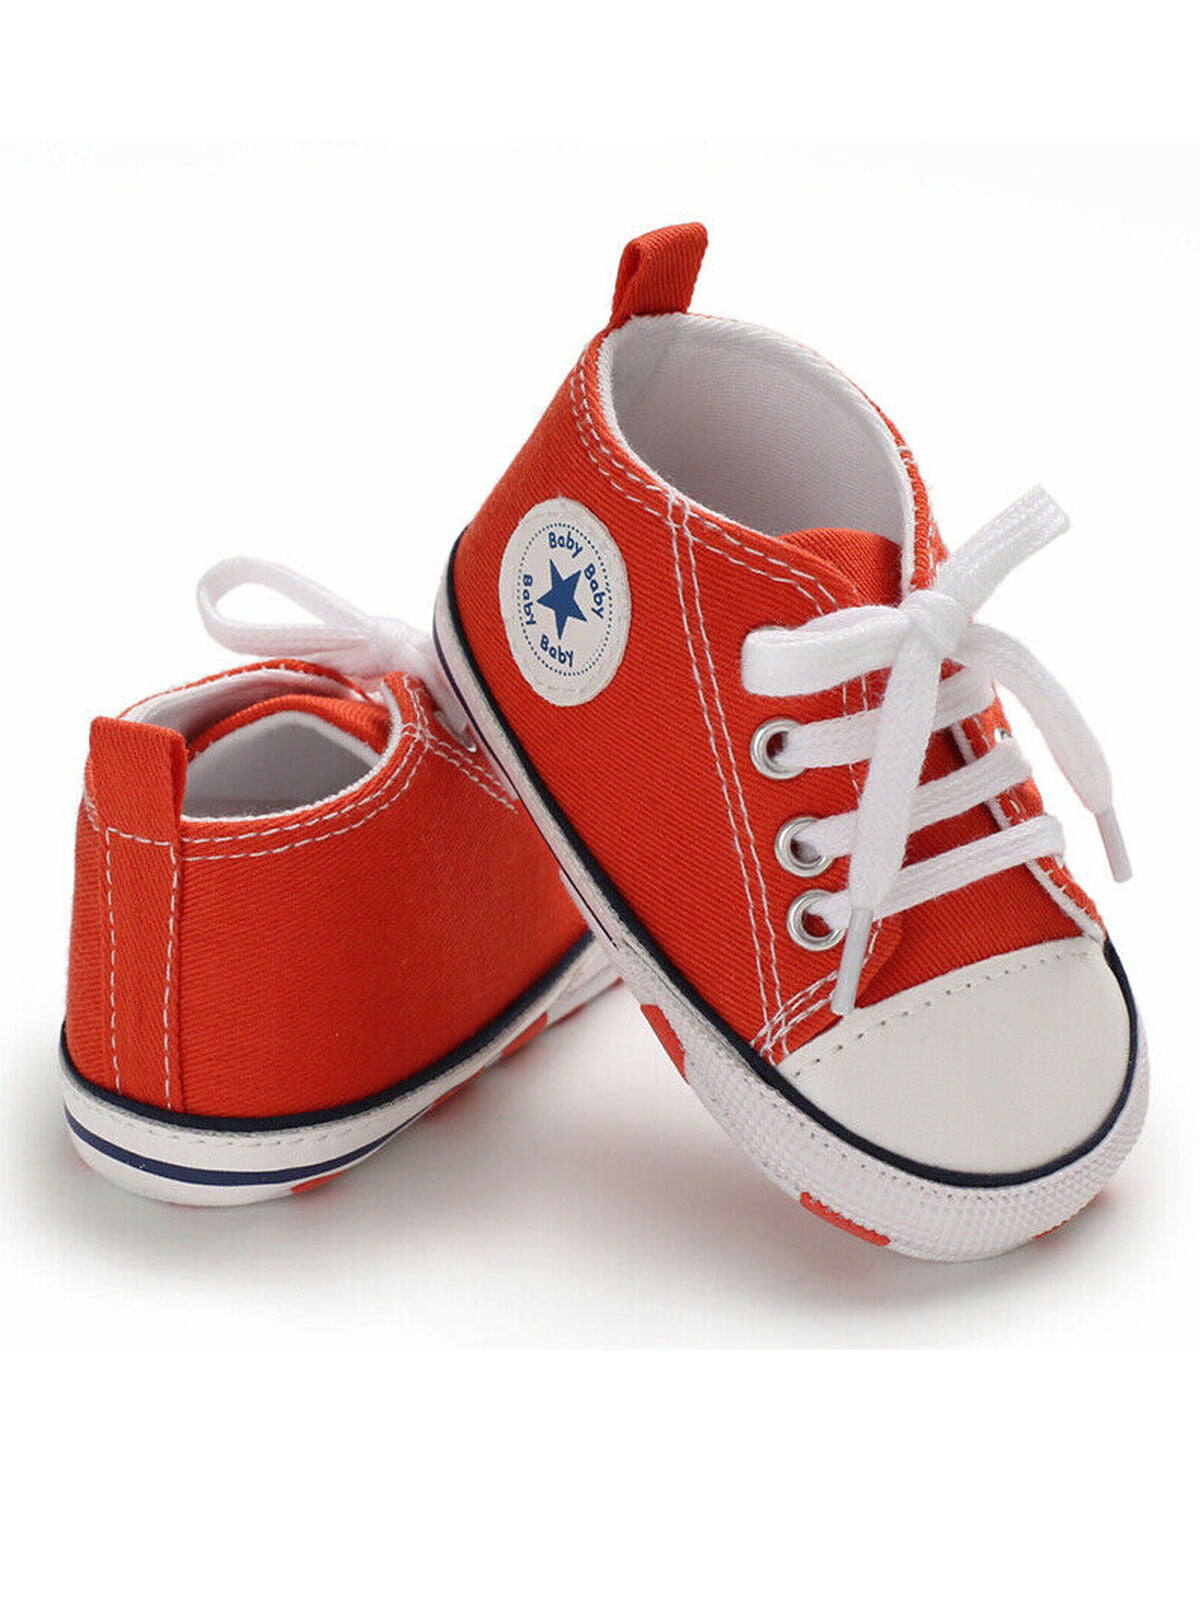 Newborn Girls Leather Shoes Hollow Out Toddler First Walkers Shoes Sneakers Chic 